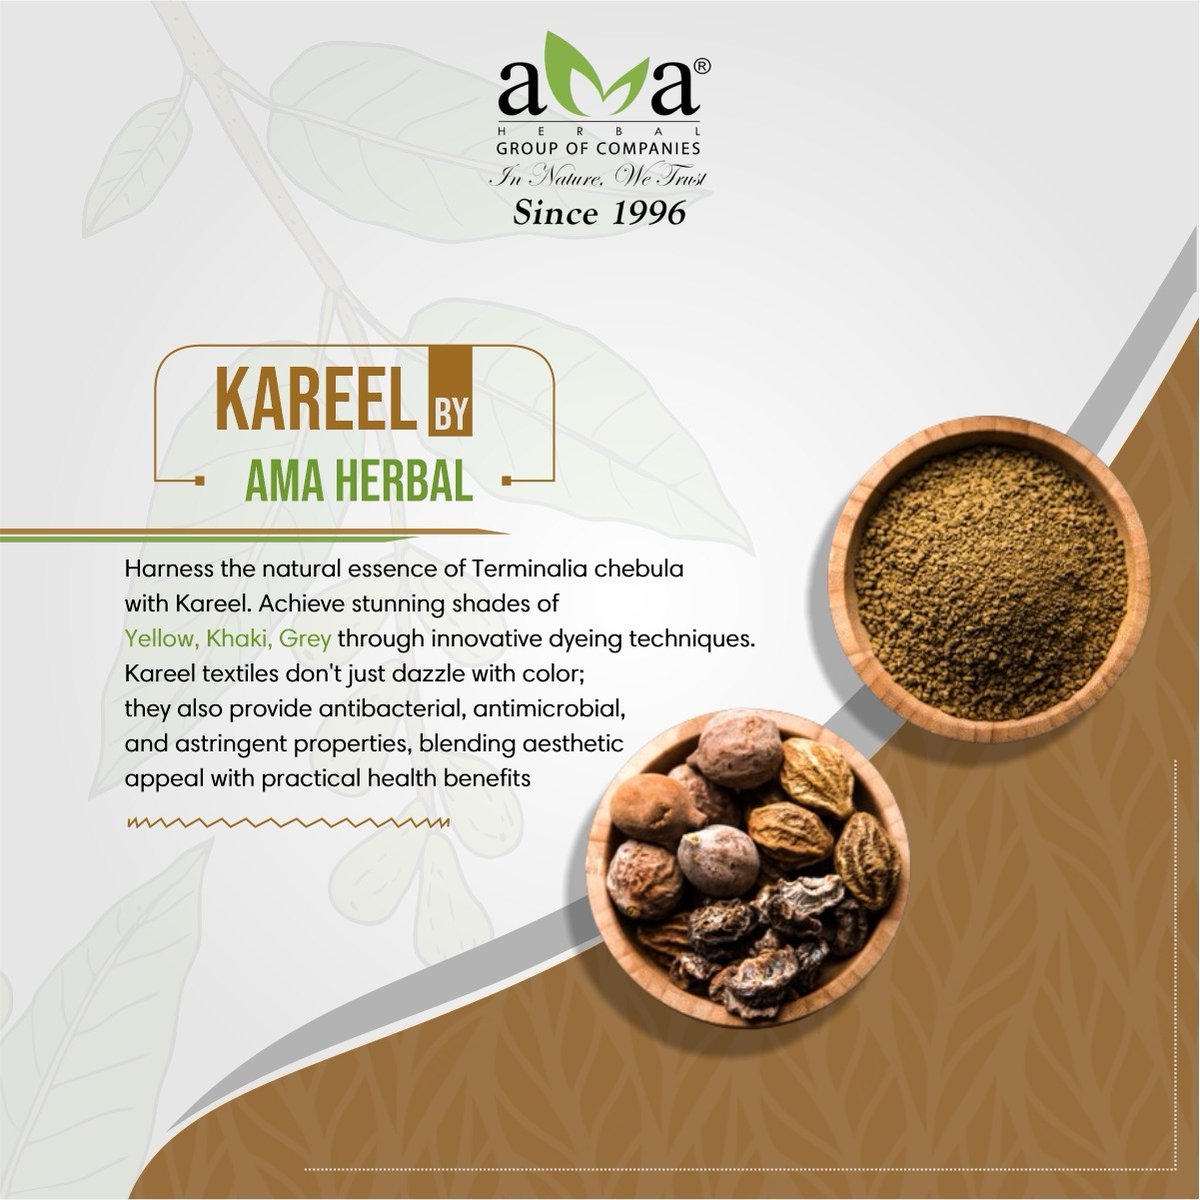 Embrace the vibrant hues of nature with #Kareel by #AMAHerbal! Infused with Terminalia chebula, our textiles offer not just breathtaking shades of Yellow, Khaki, & Grey, but also boast antibacterial and antimicrobial properties.
#EcoFashion #sustainableliving #naturaldyes #Yellow